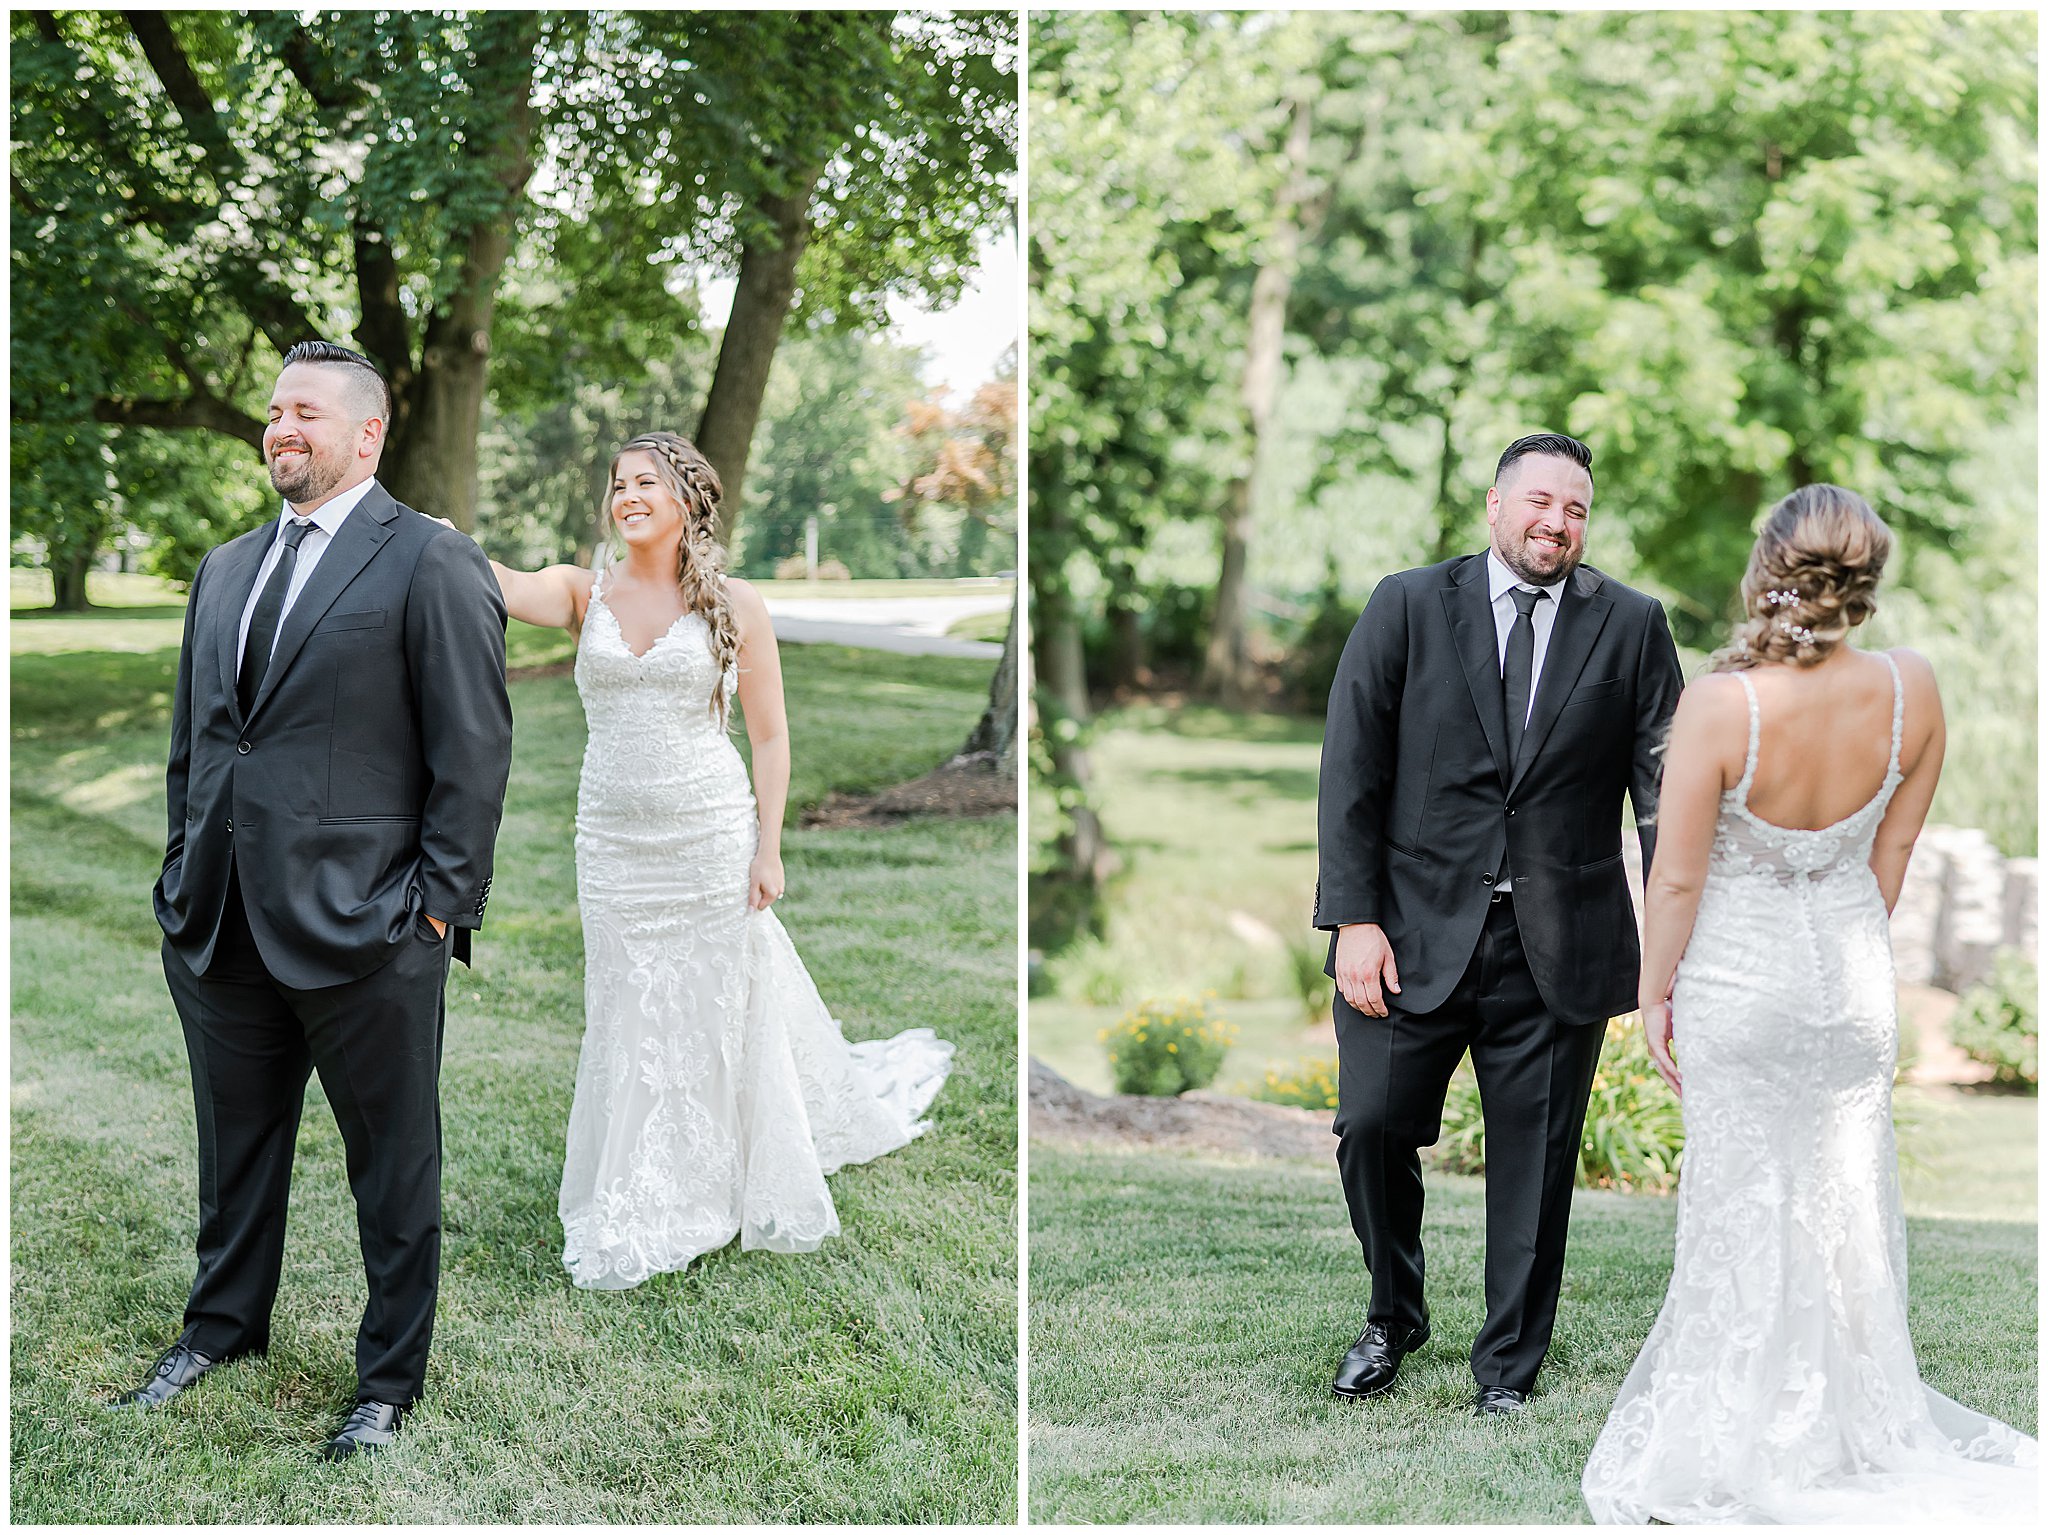 Historic Ashland Wedding | Historic Ashland Wedding Photographer | Wrightsville PA | Wrightsville PA Wedding | Wrightsville PA Wedding Venue | First look | Bride and Groom First Look